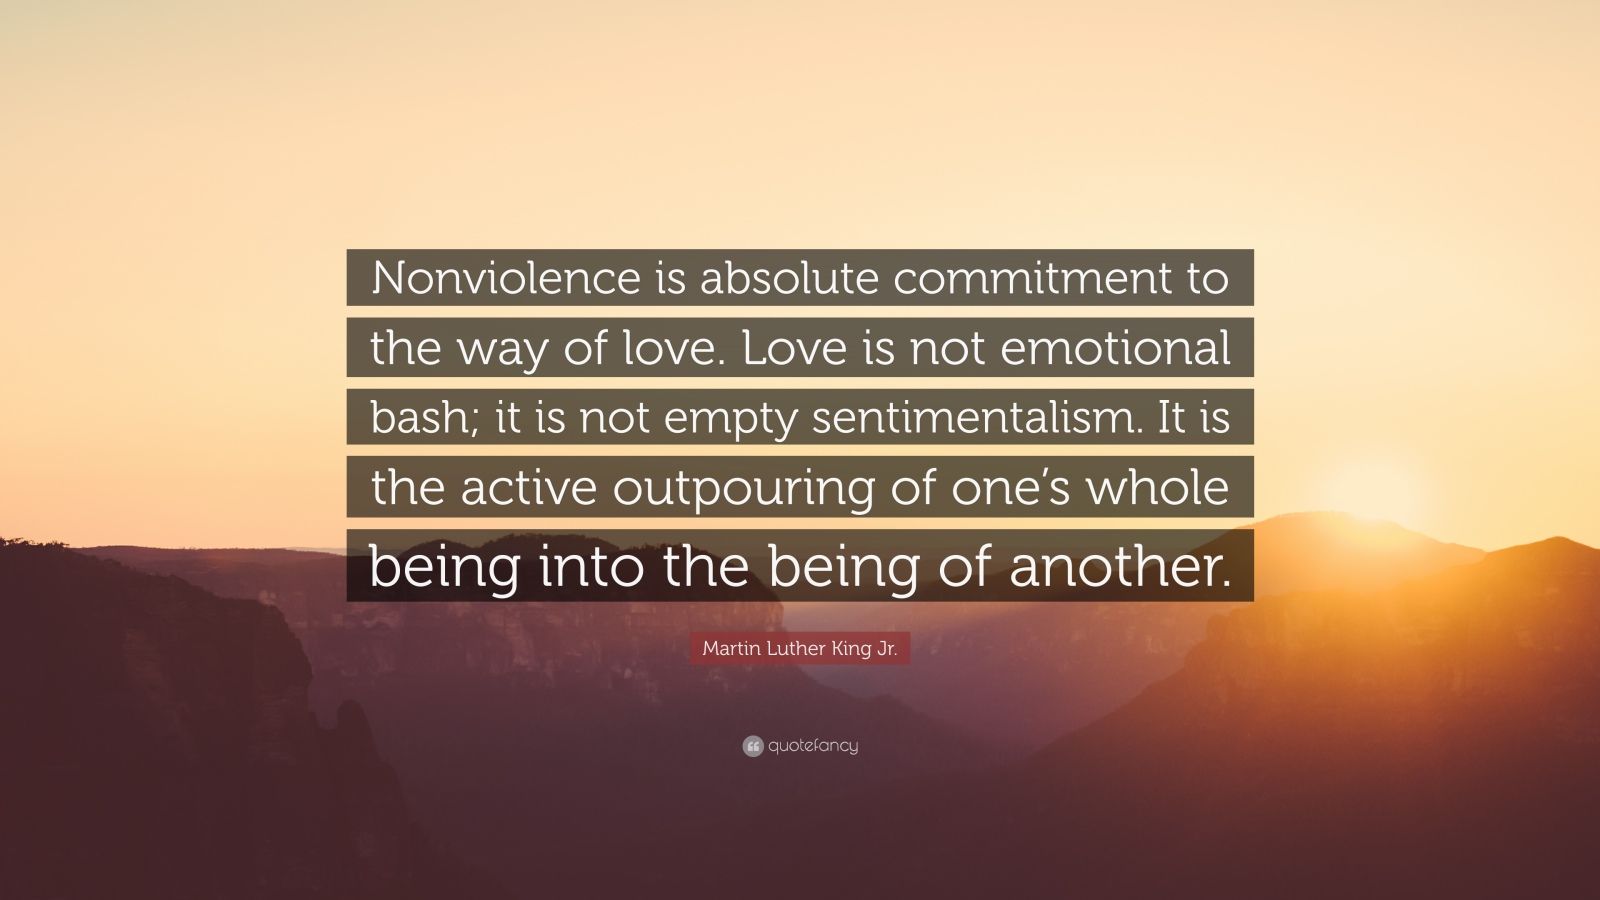 Martin Luther King Jr. Quote: “Nonviolence is absolute commitment to the  way of love. Love is not emotional bash; it is not empty sentimentalism. It  is”